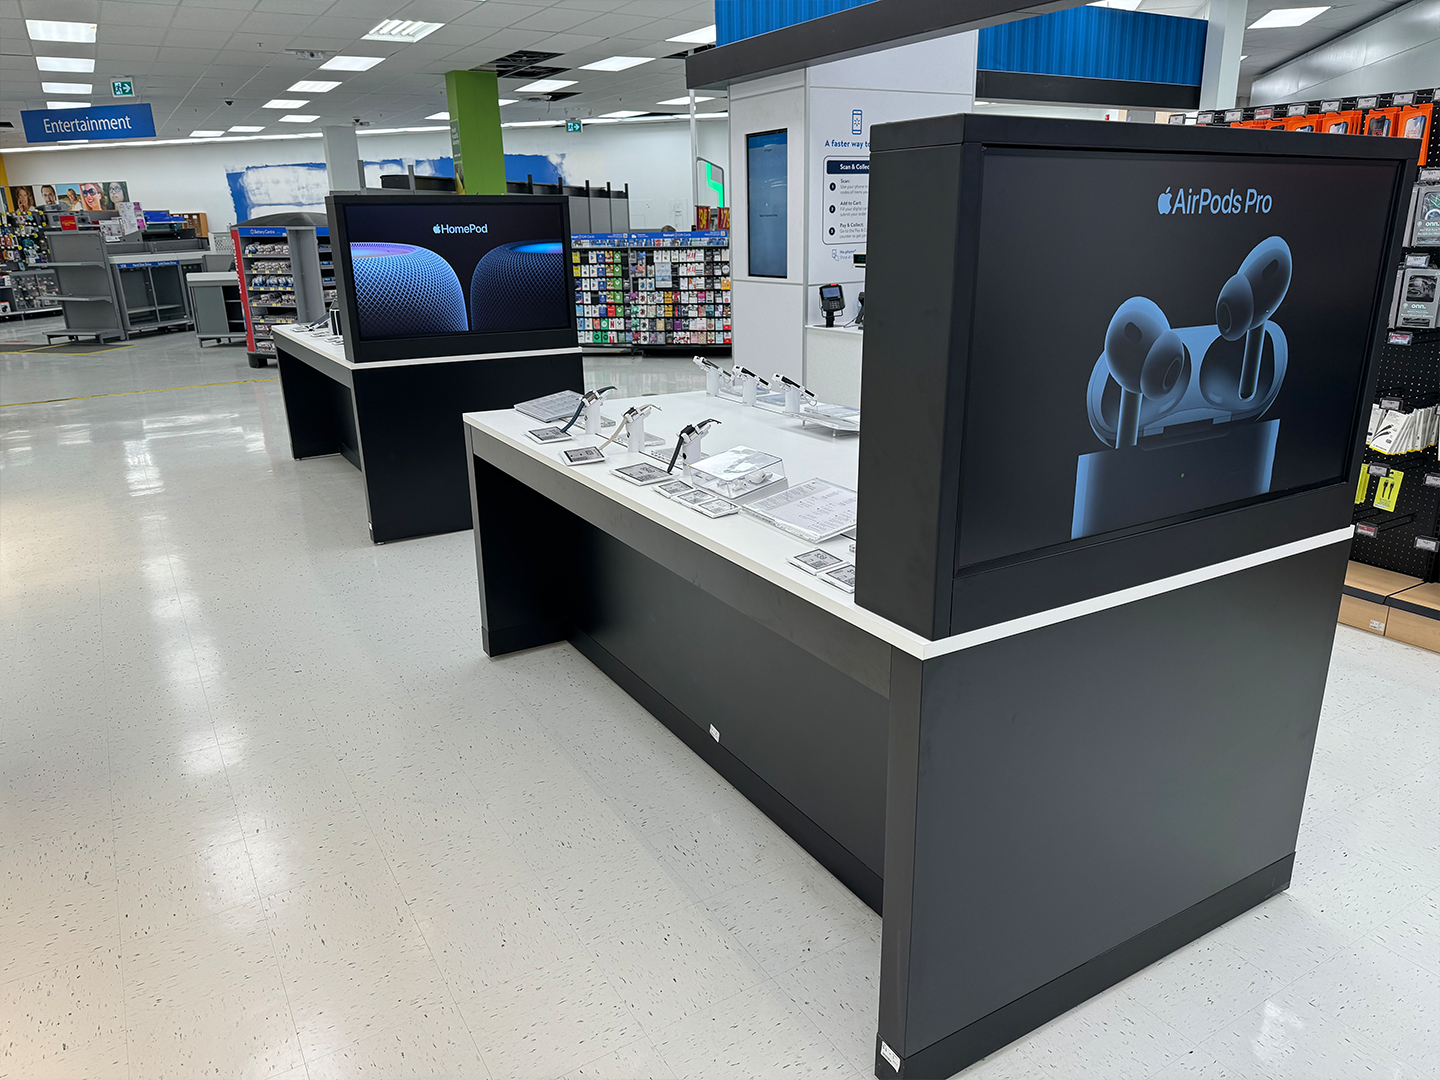 Side view of the custom electronic display at Walmart, showcasing the structure